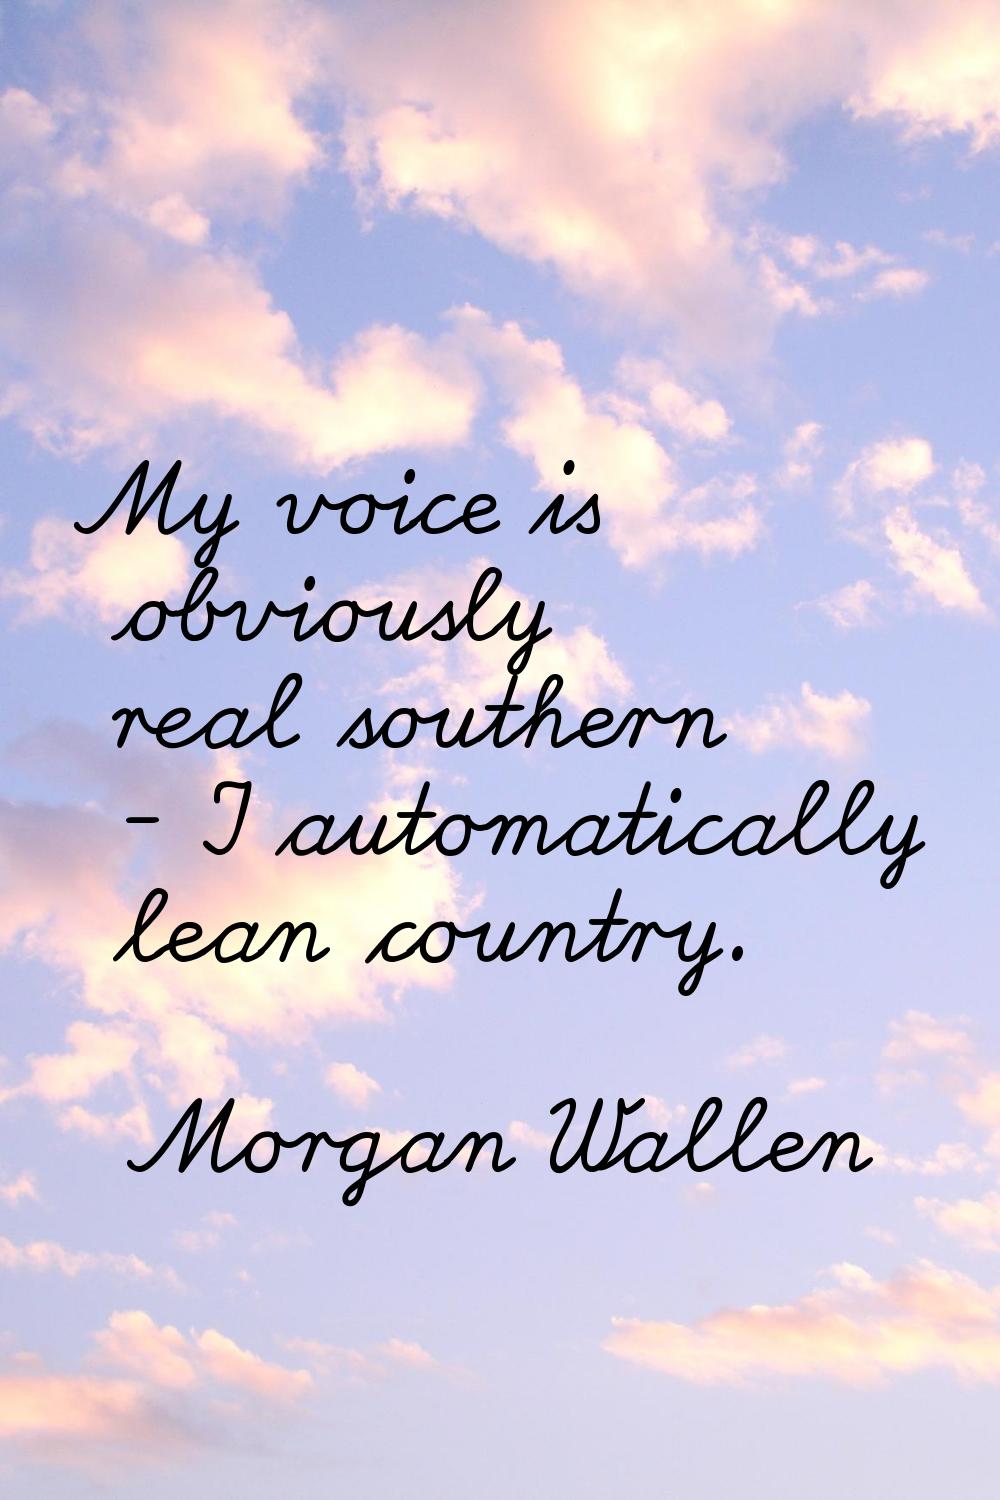 My voice is obviously real southern - I automatically lean country.